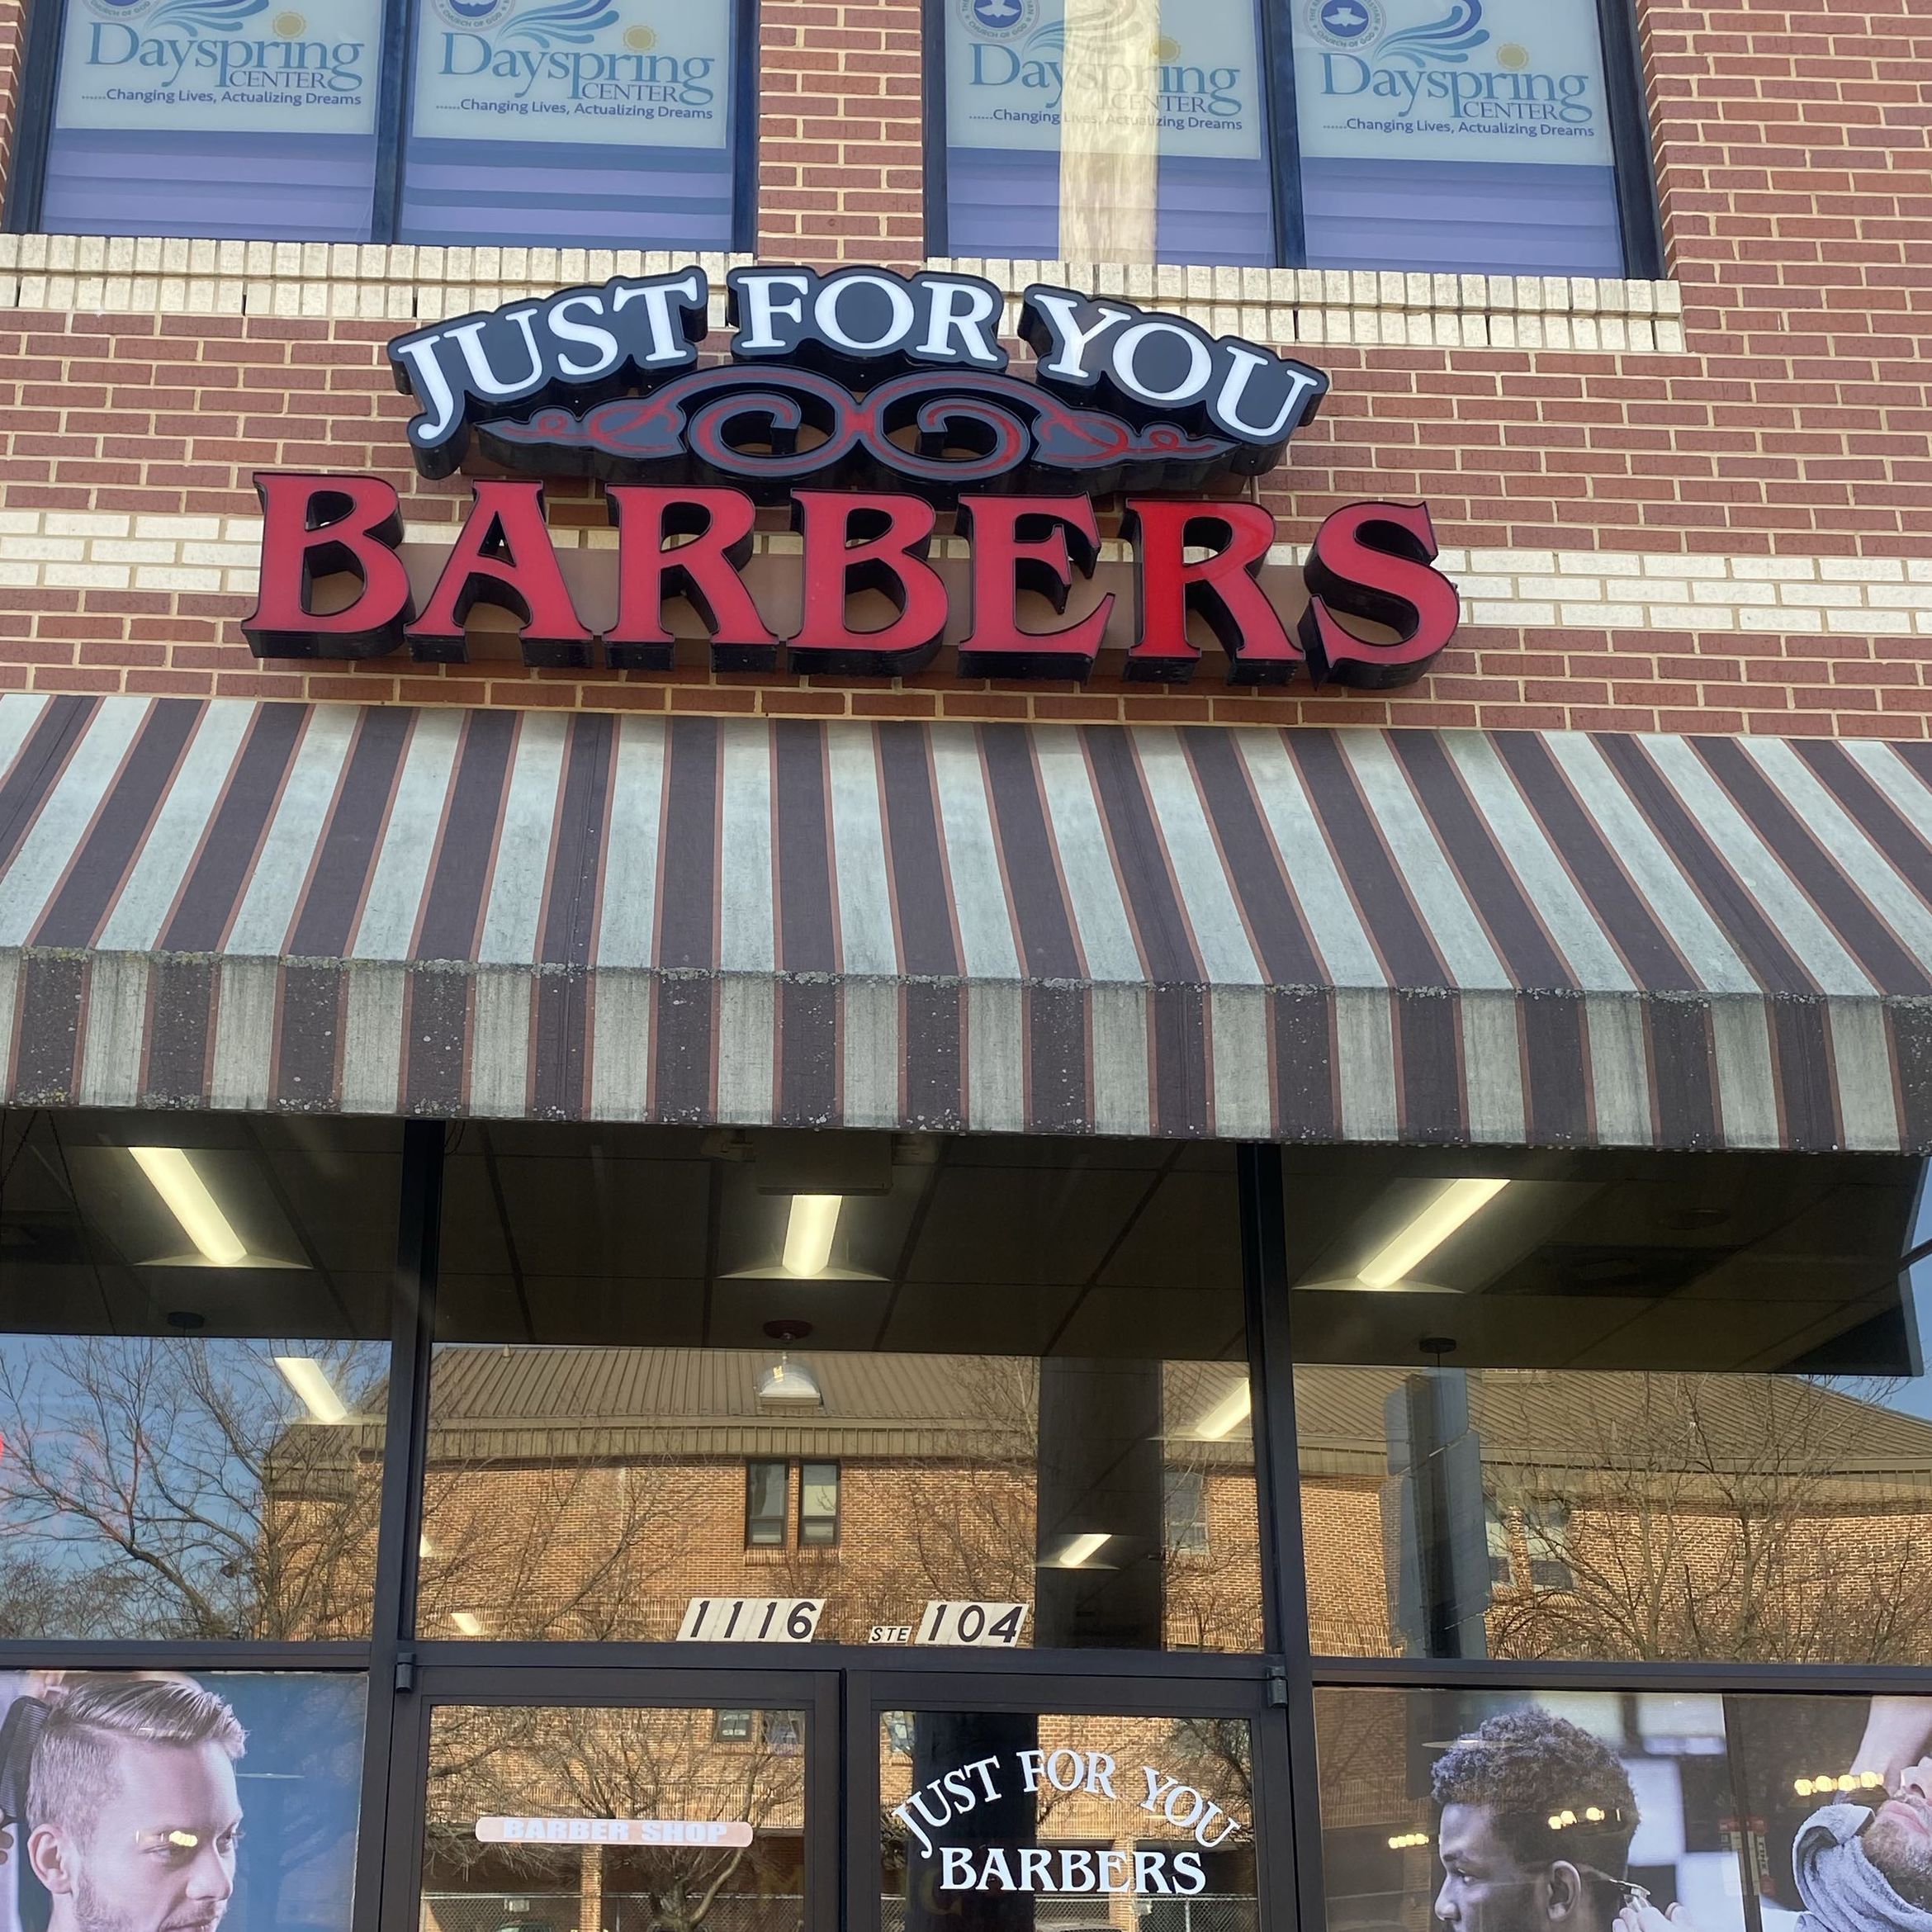 Davon The Barber @ Just For You Barbers, 1116 Reisterstown Road, 104, Pikesville, 21208